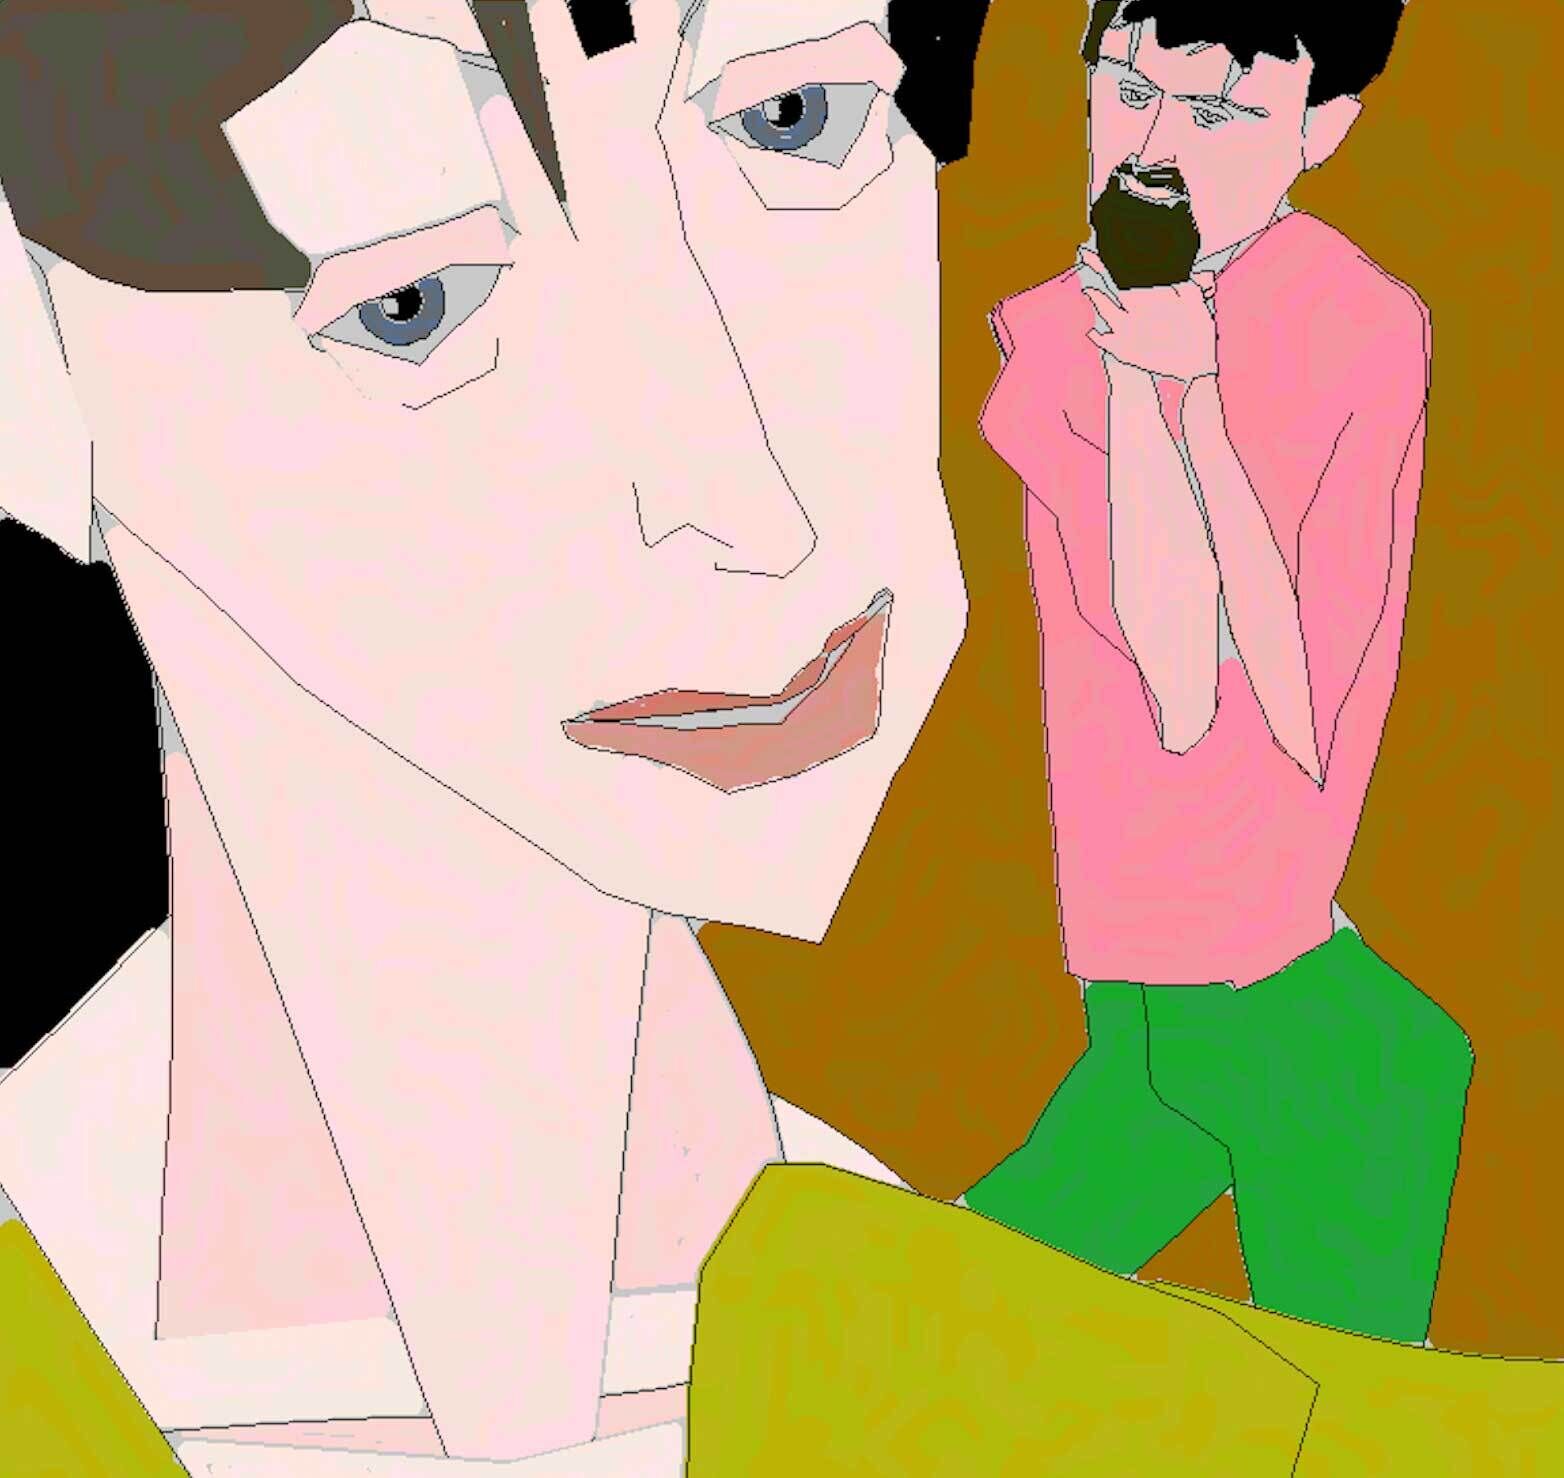 An AI created stylized digital artwork of two abstract human figures, one in the foreground with a focus on the face, and another in the background.